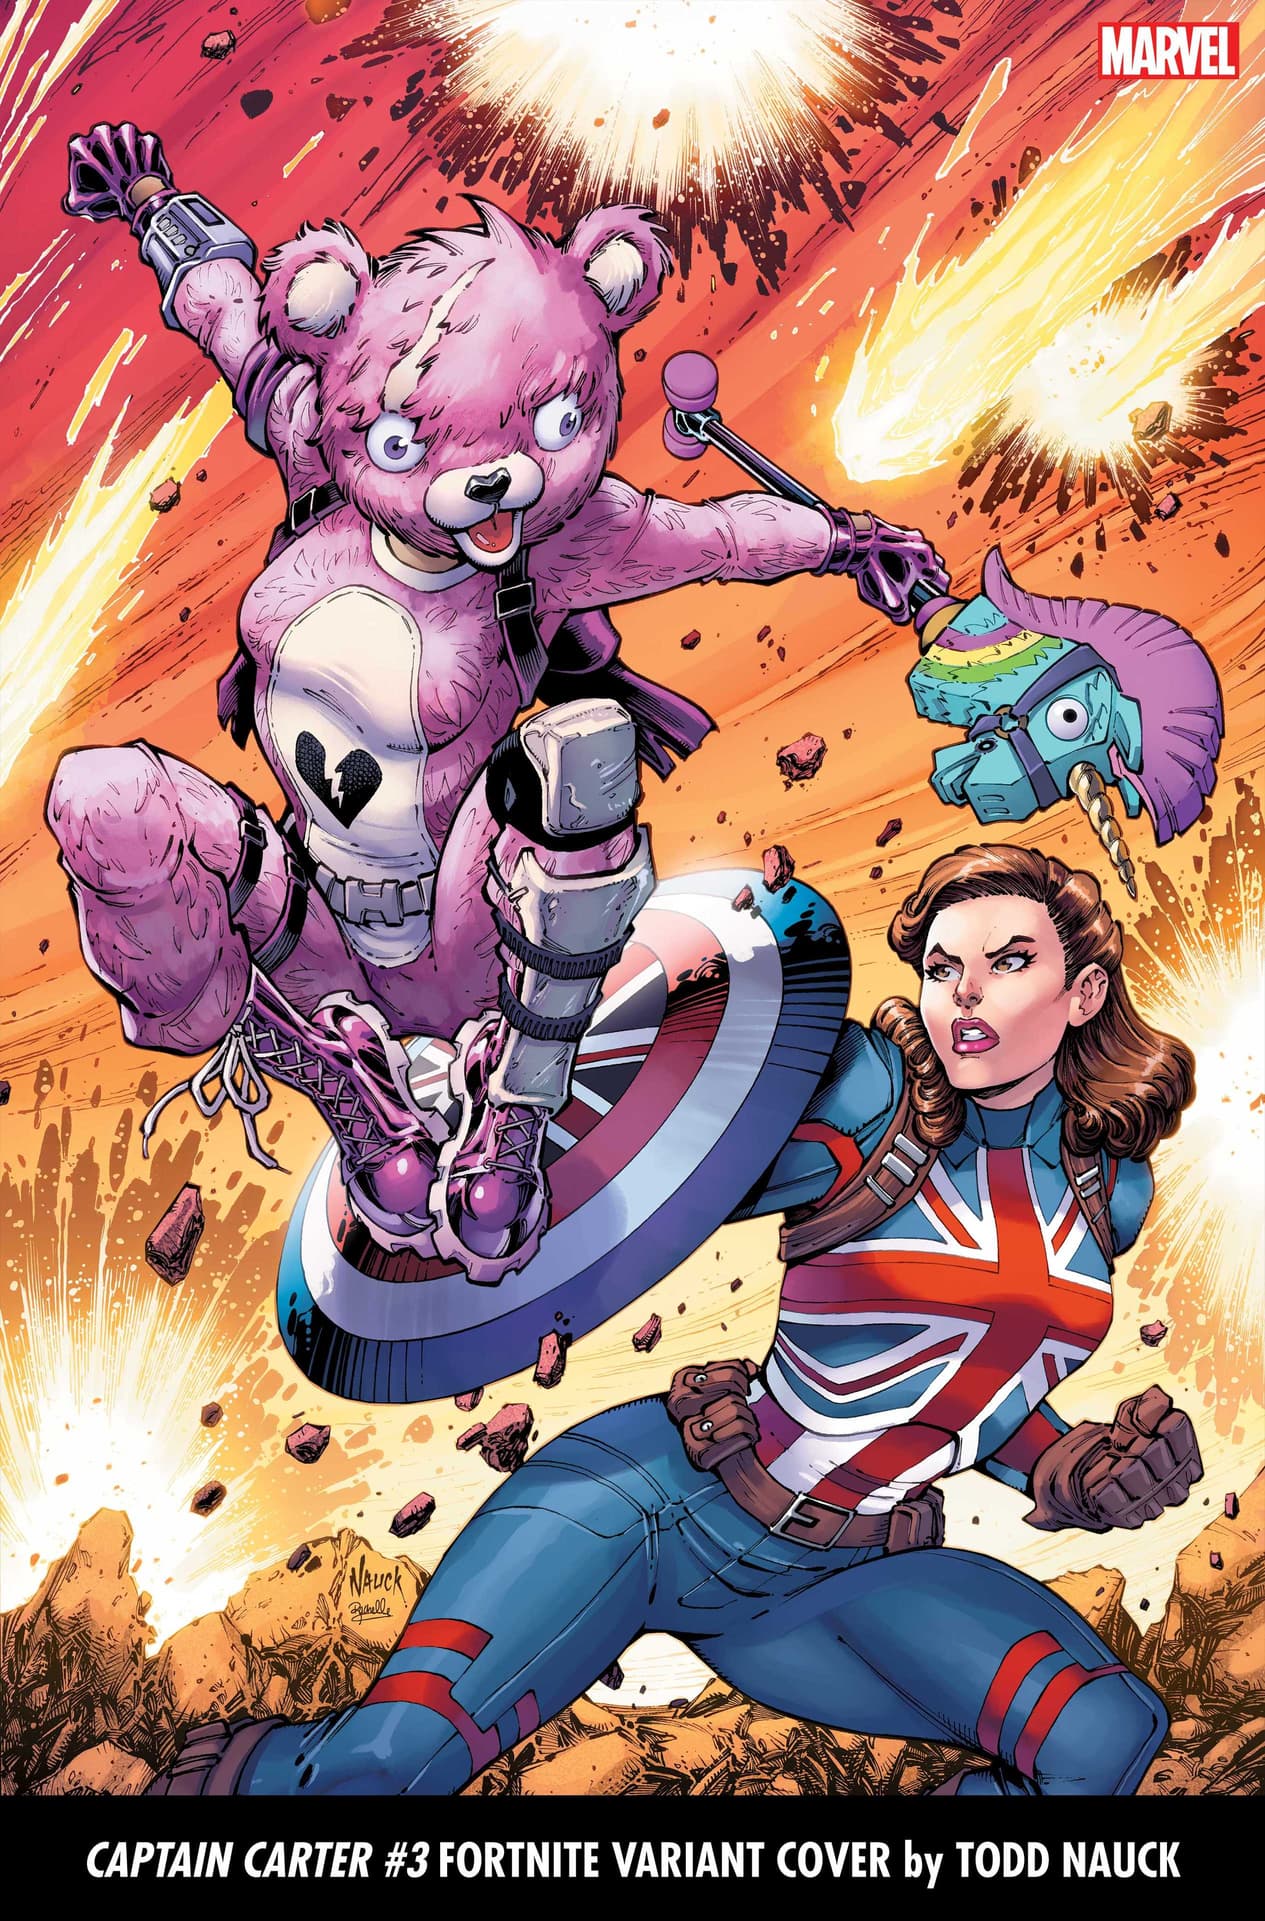 Captain Carter #3 Fortnite variant cover by Todd Nauck